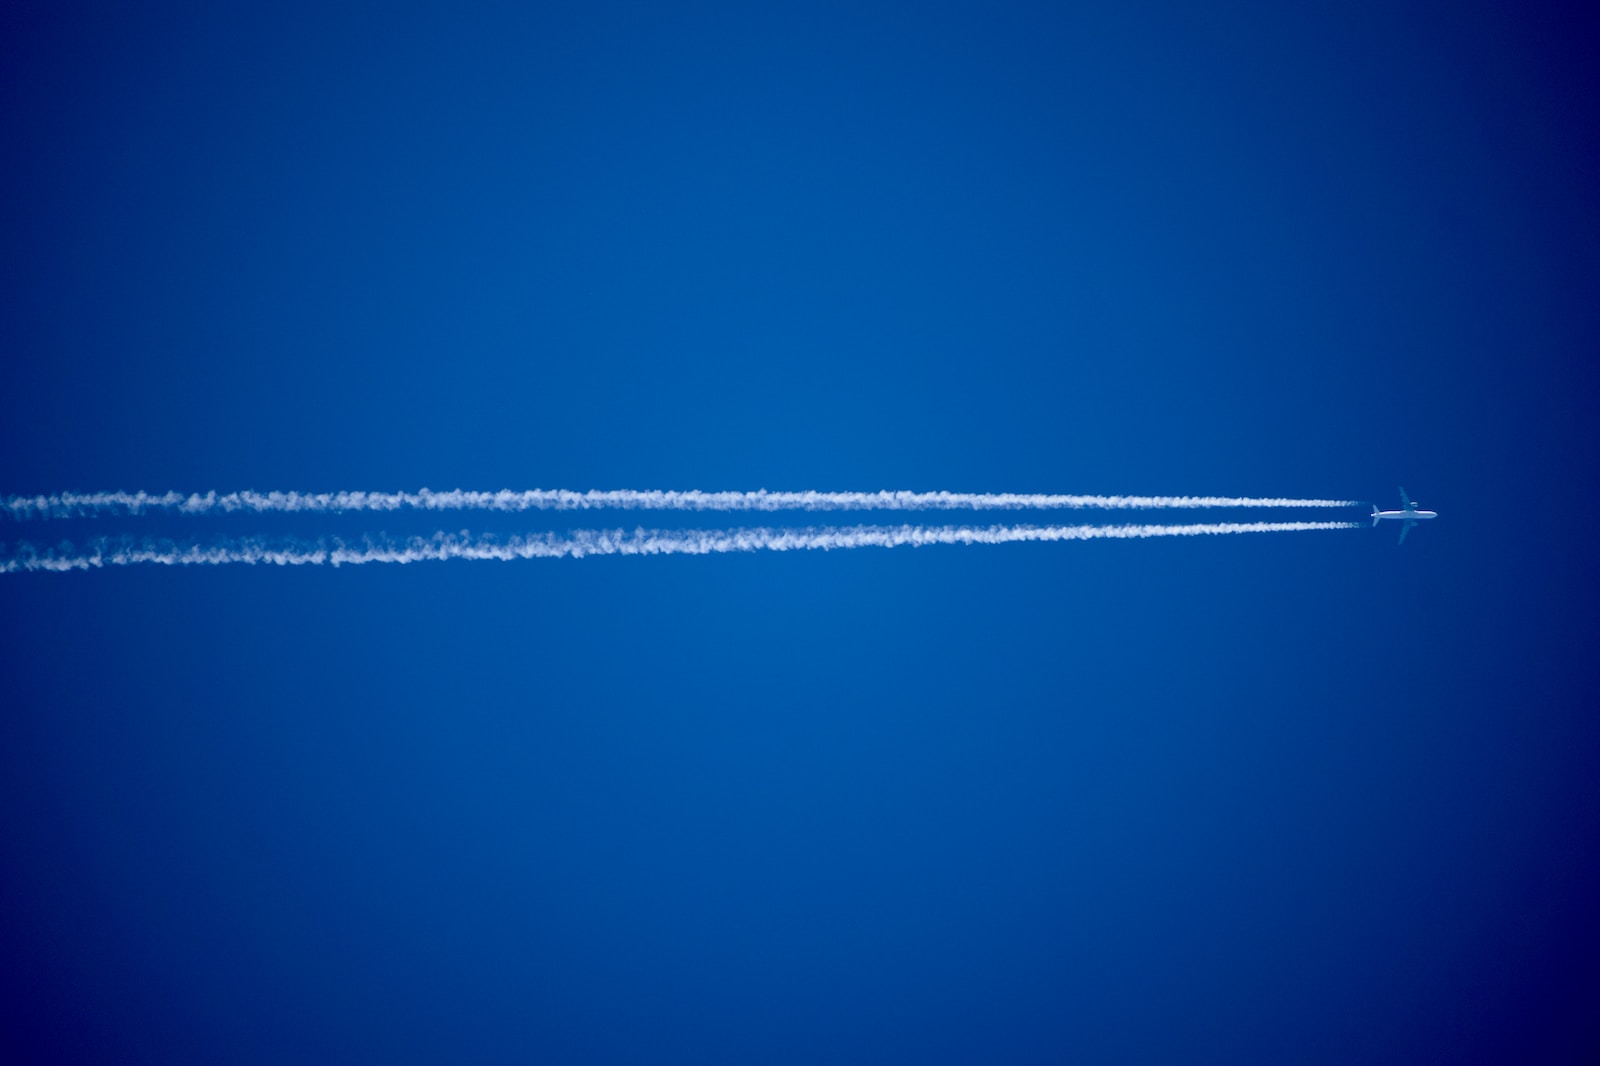 contrails, vapor trails, aircraft emissions, climate change, air quality, ozone depletion, air traffic management, flight planning, alternative fuels, weather patterns, radiative forcing,